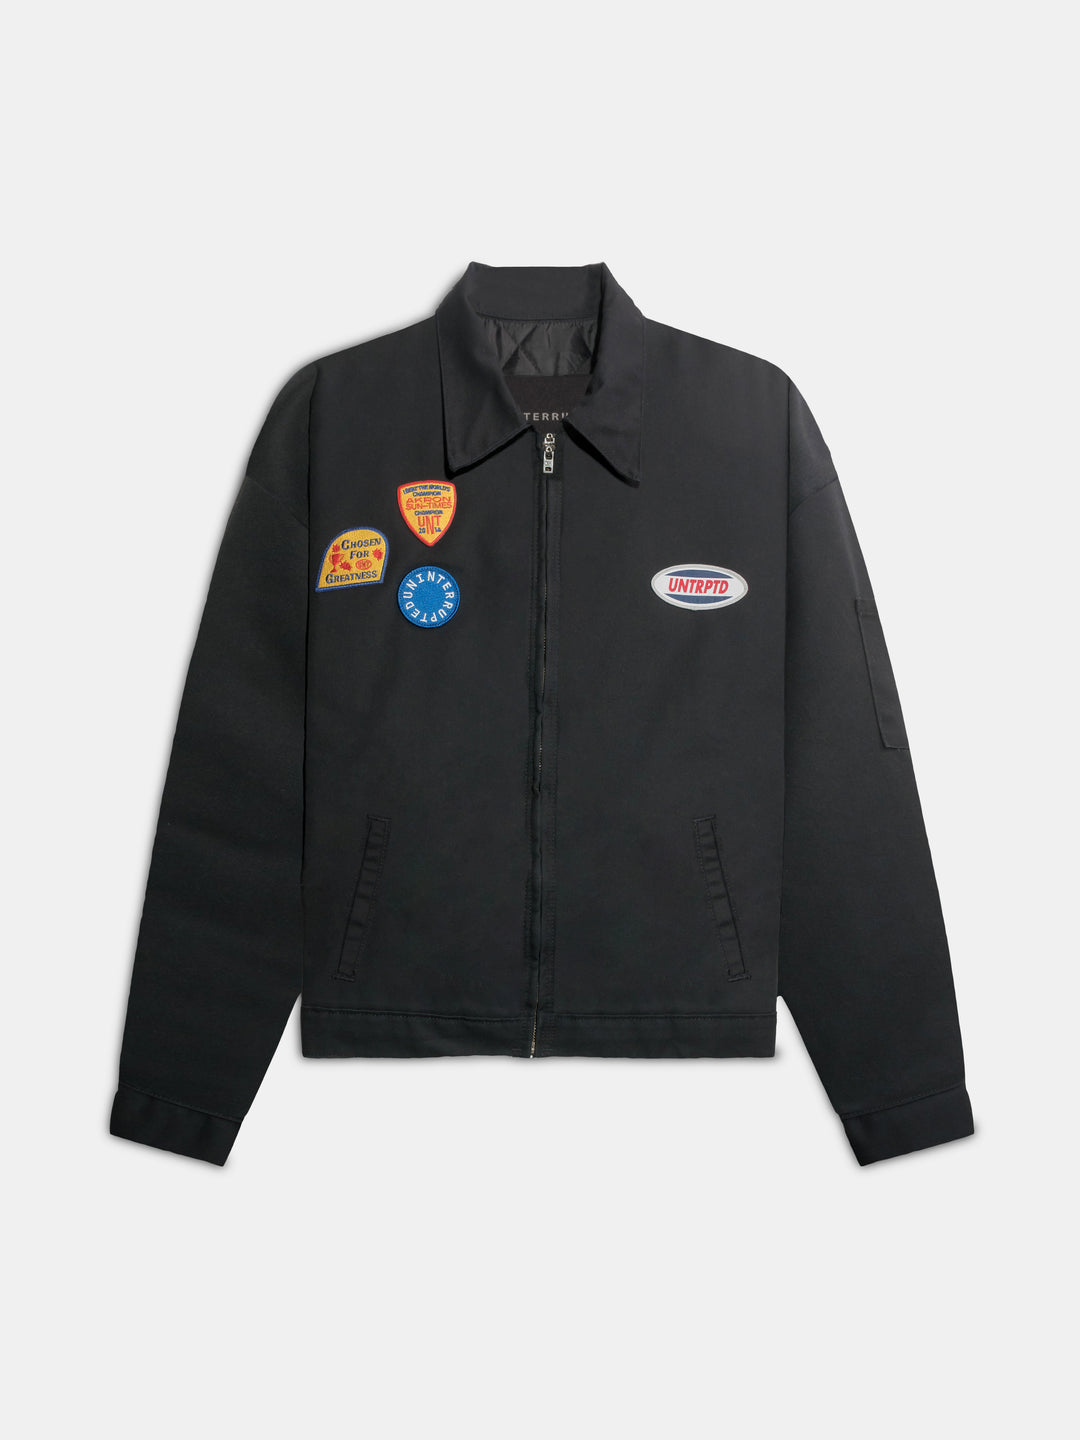 Mechanic Jacket with Patch | Bubba Black / M (12 to 24 Months)